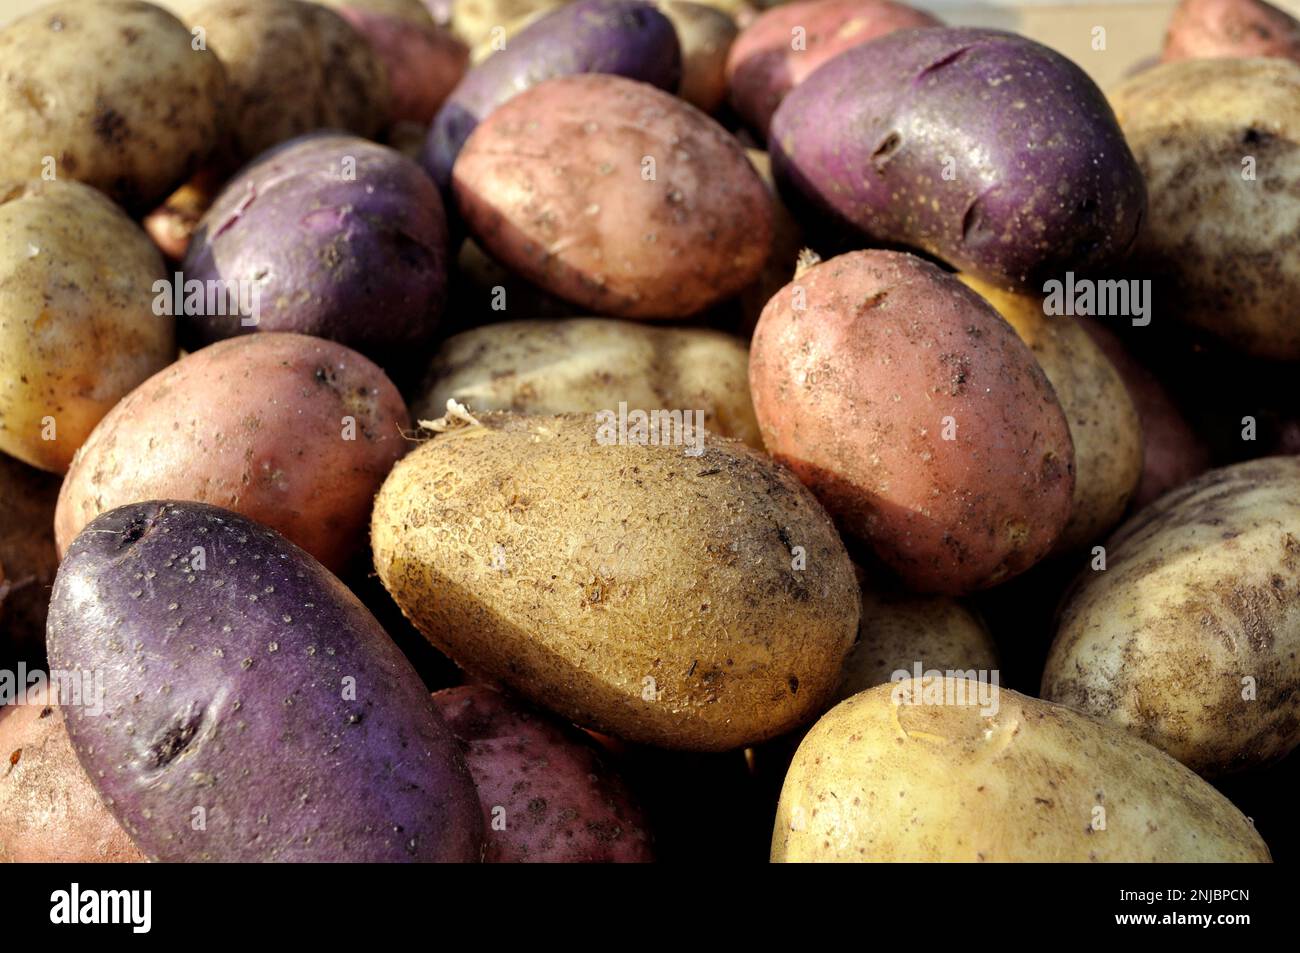 the stack of freshly harvested unwashed  different sorts of  potato tubers Stock Photo